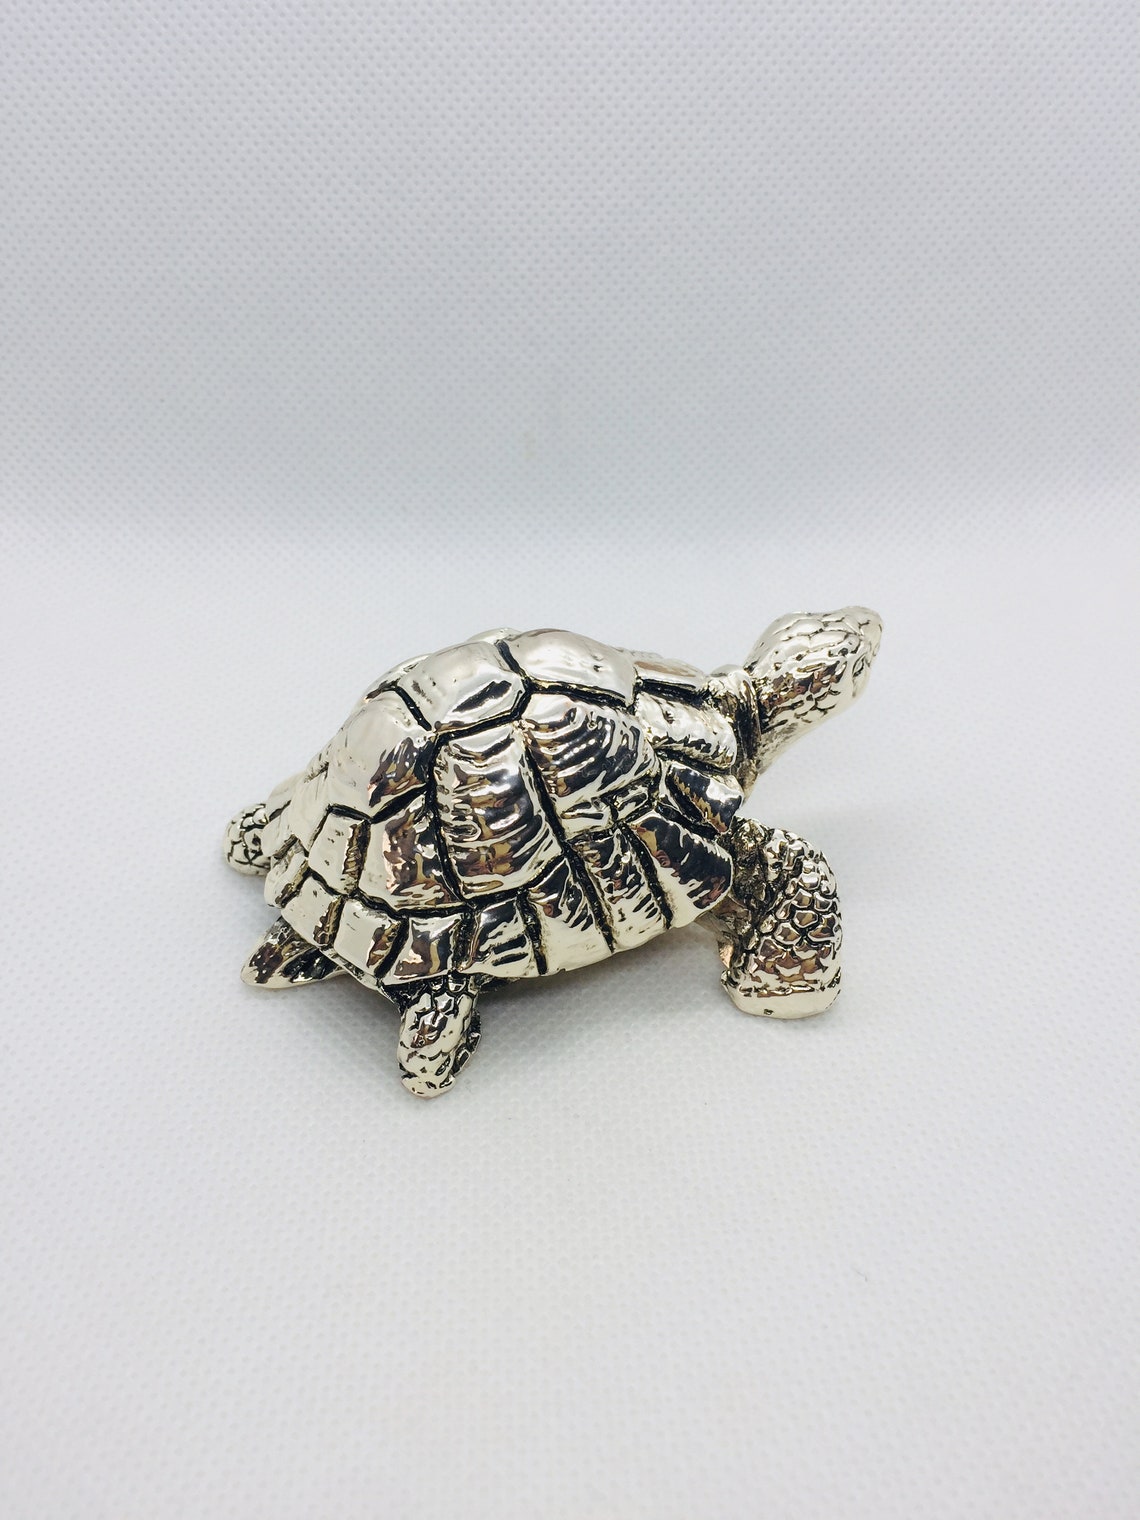 925 Sterling Silver Turtle Figurine solid silver animal | Etsy